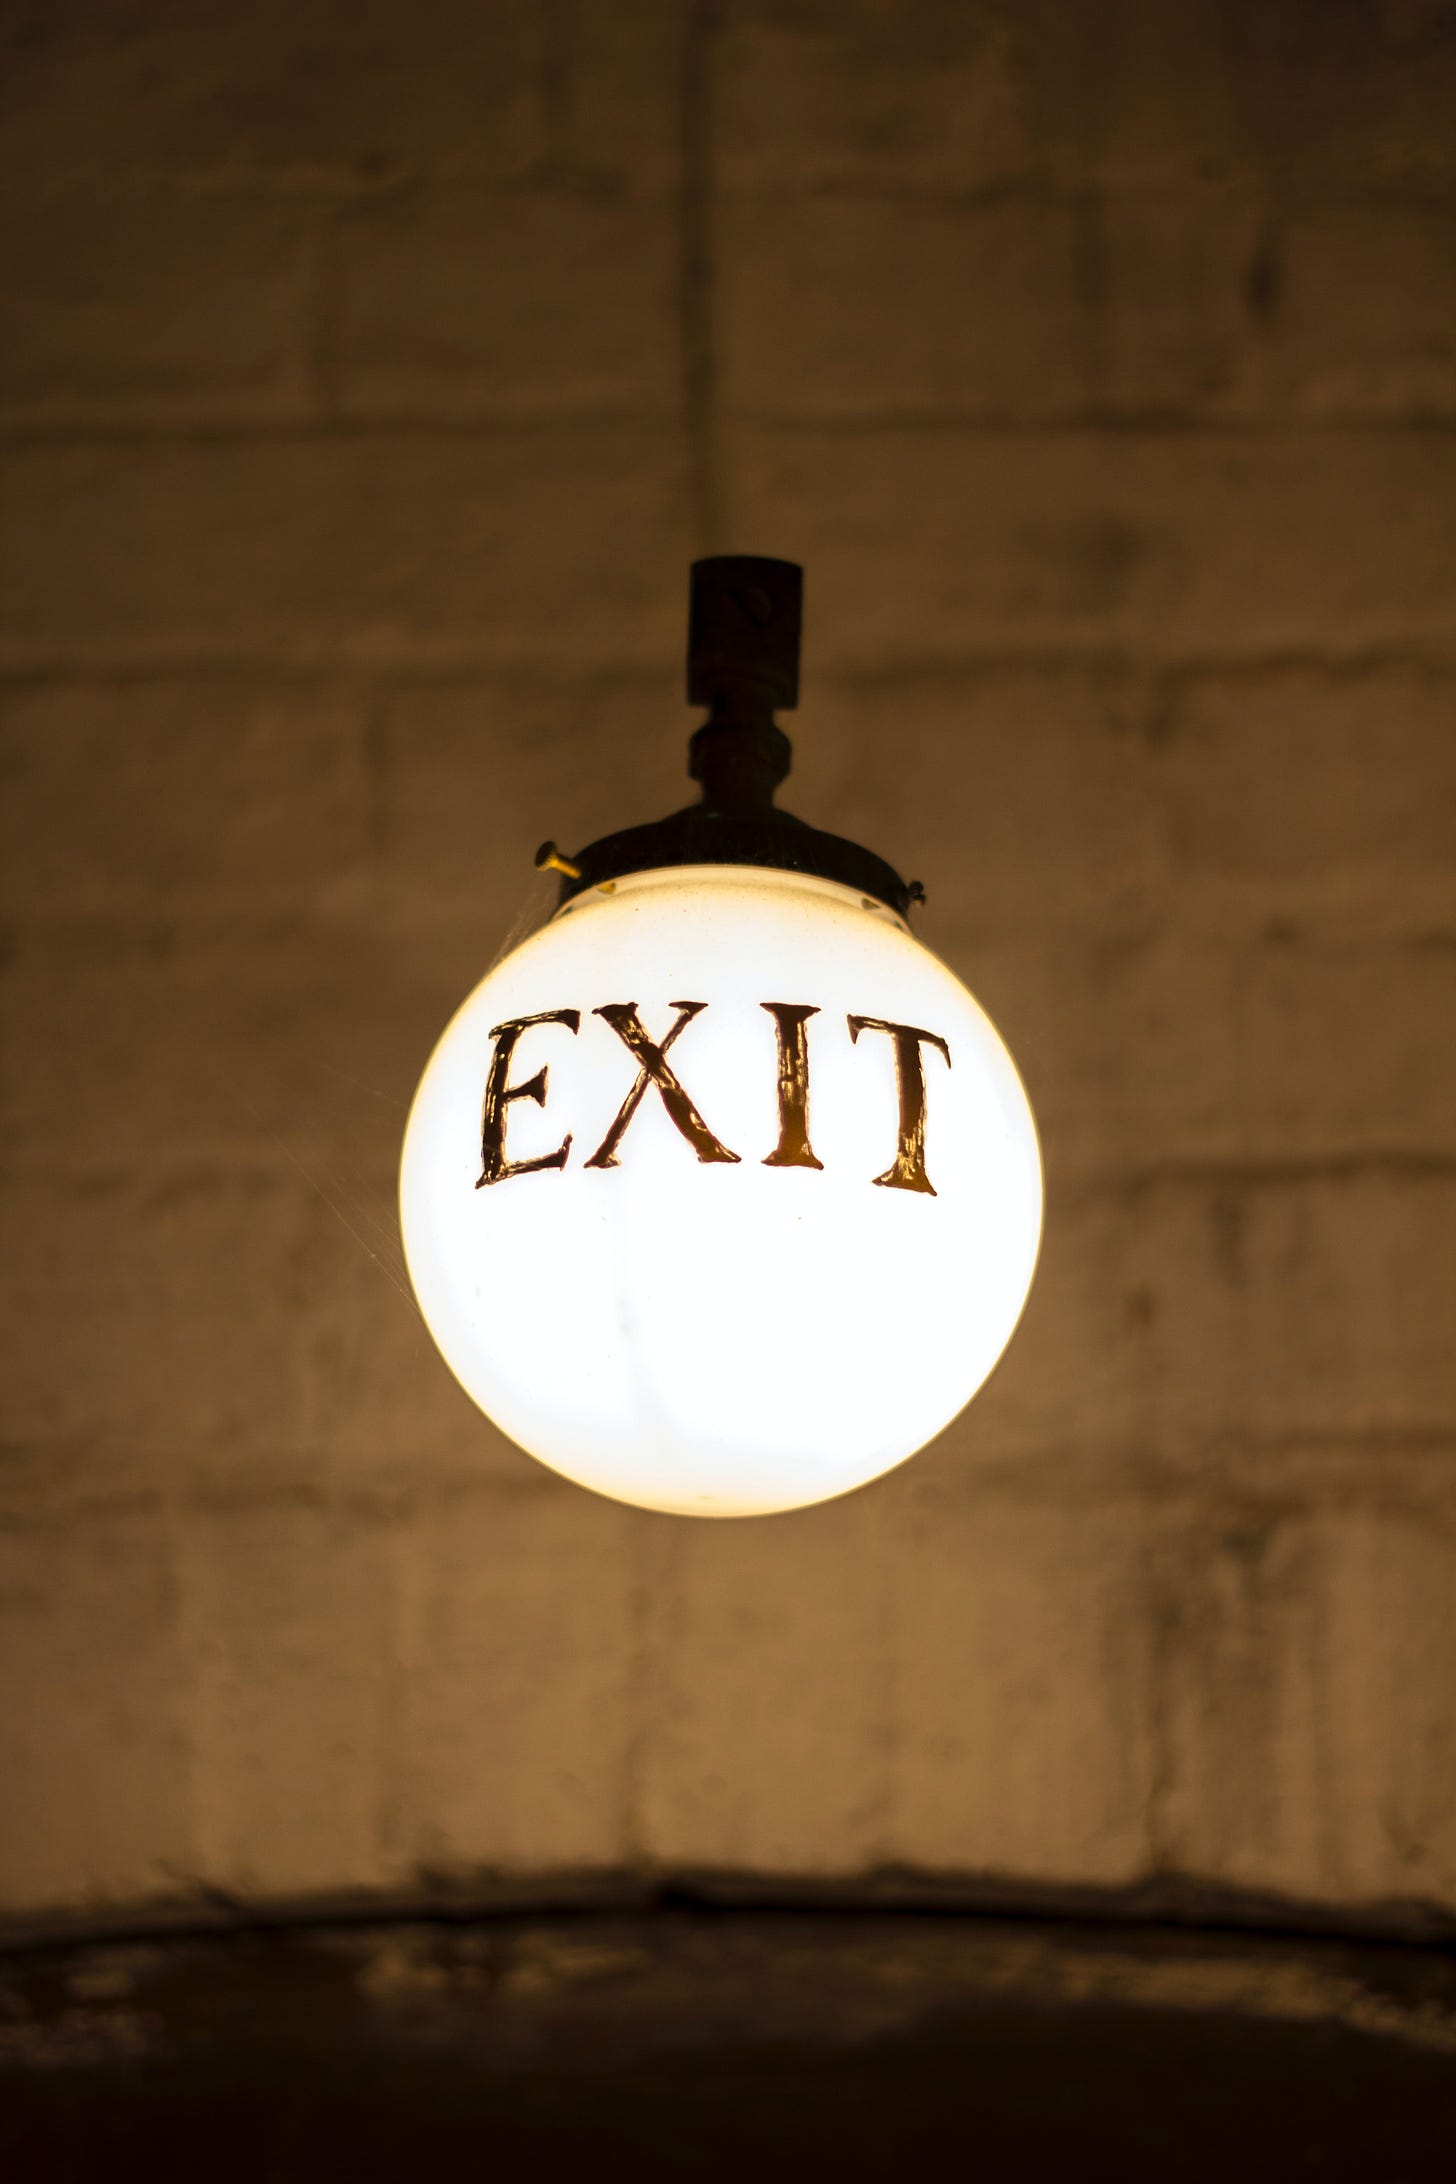 Image of hanging globe light with the word EXIT.